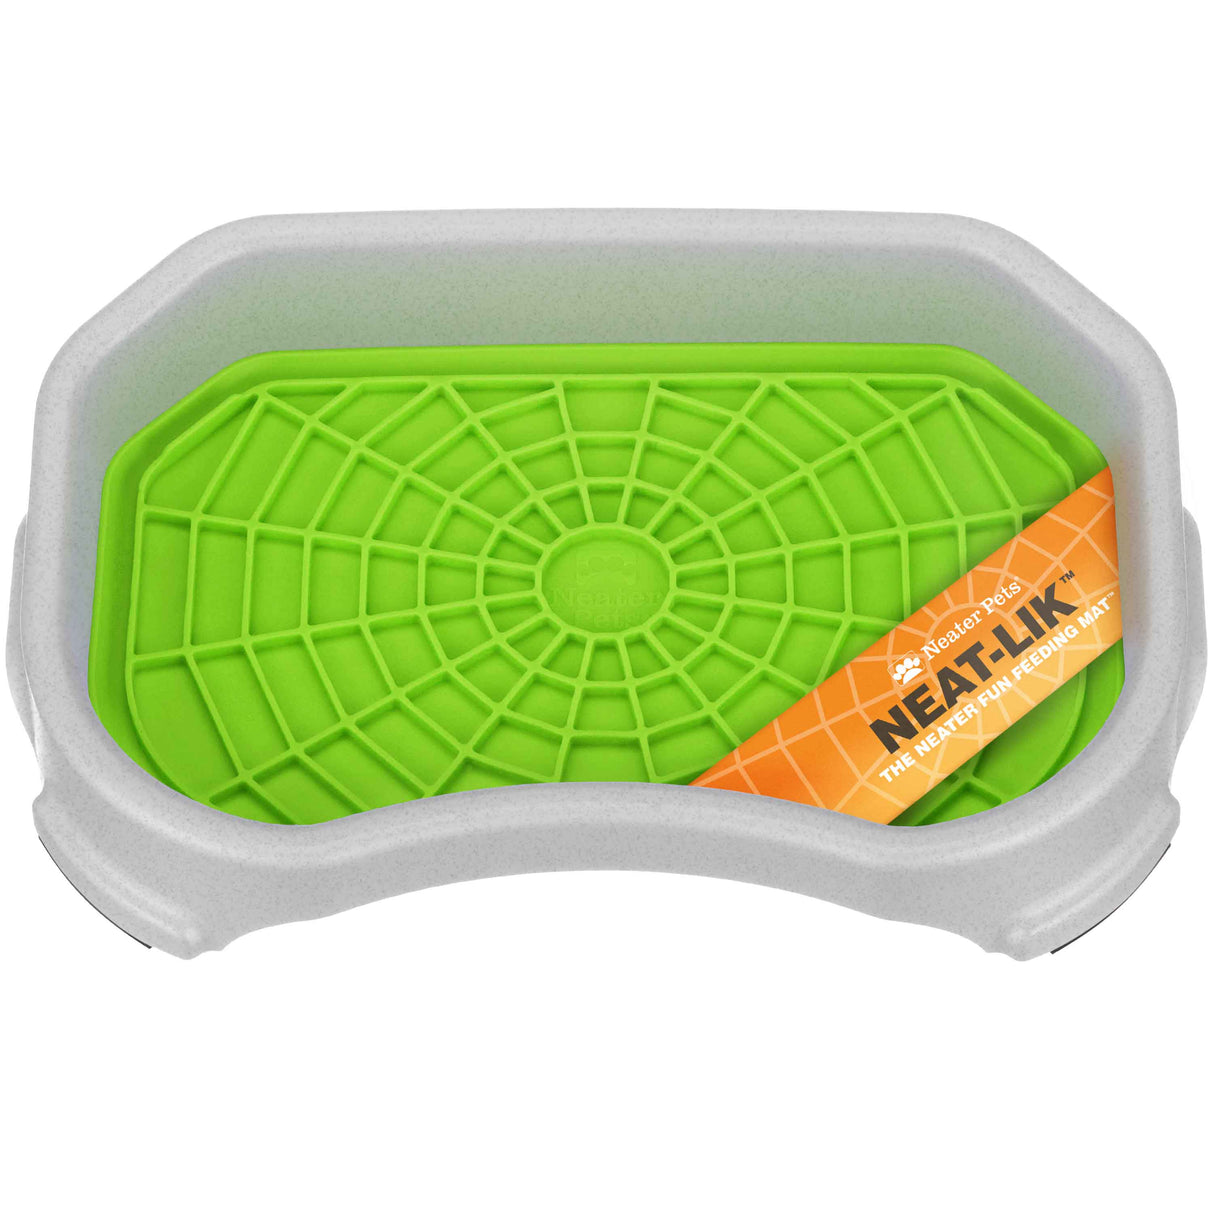 Neat-Lik Slow Feed Licking Mat with Mess-Proof Tray